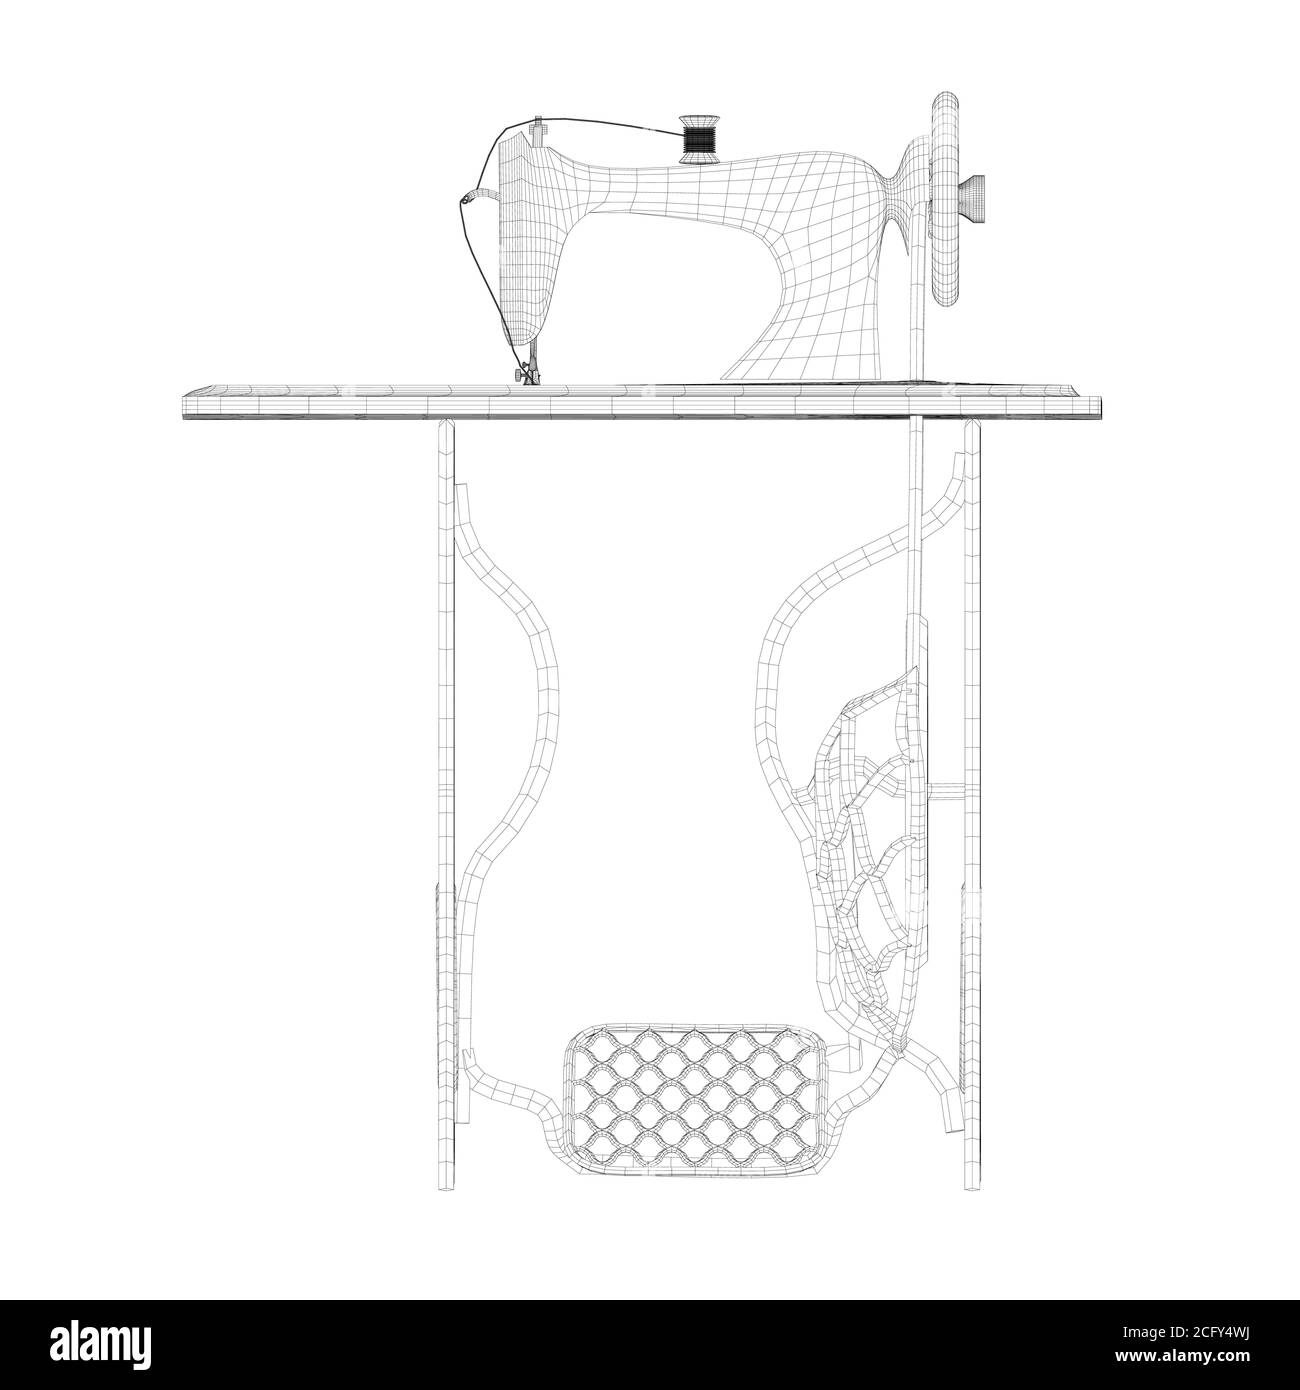 Wireframe of a decorative vintage sewing machine made of black lines on a white background. Manual sewing machine with rotation mechanism. Side view Stock Vector